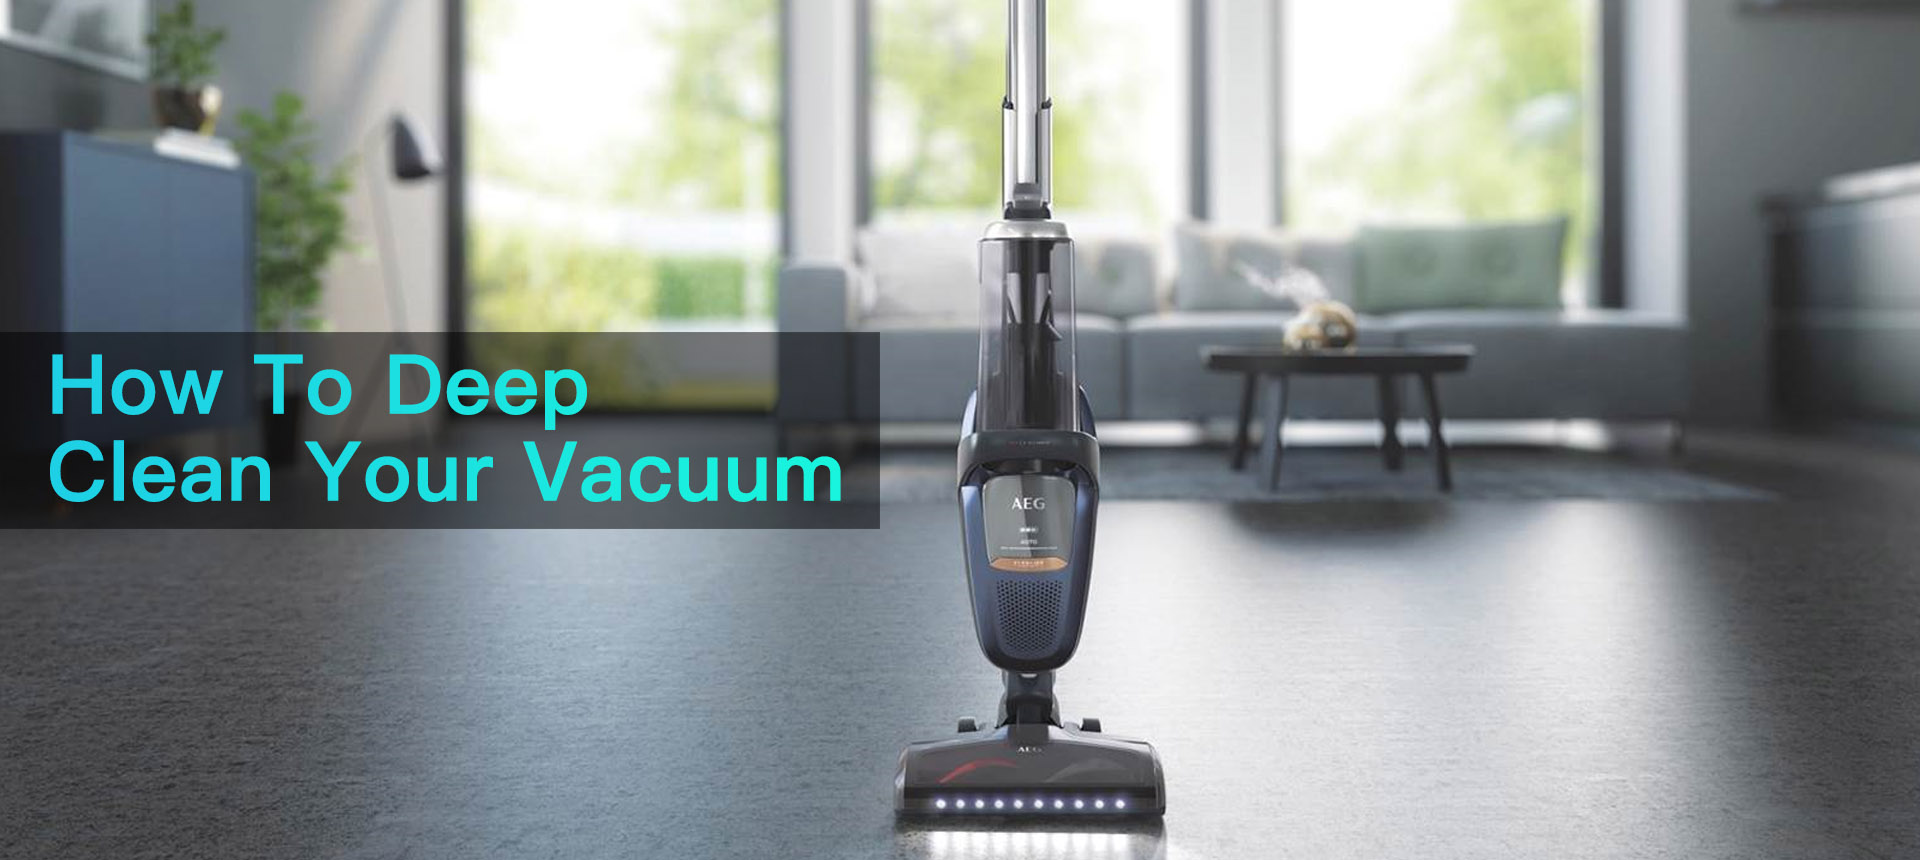 How To Deep Clean Your Vacuum